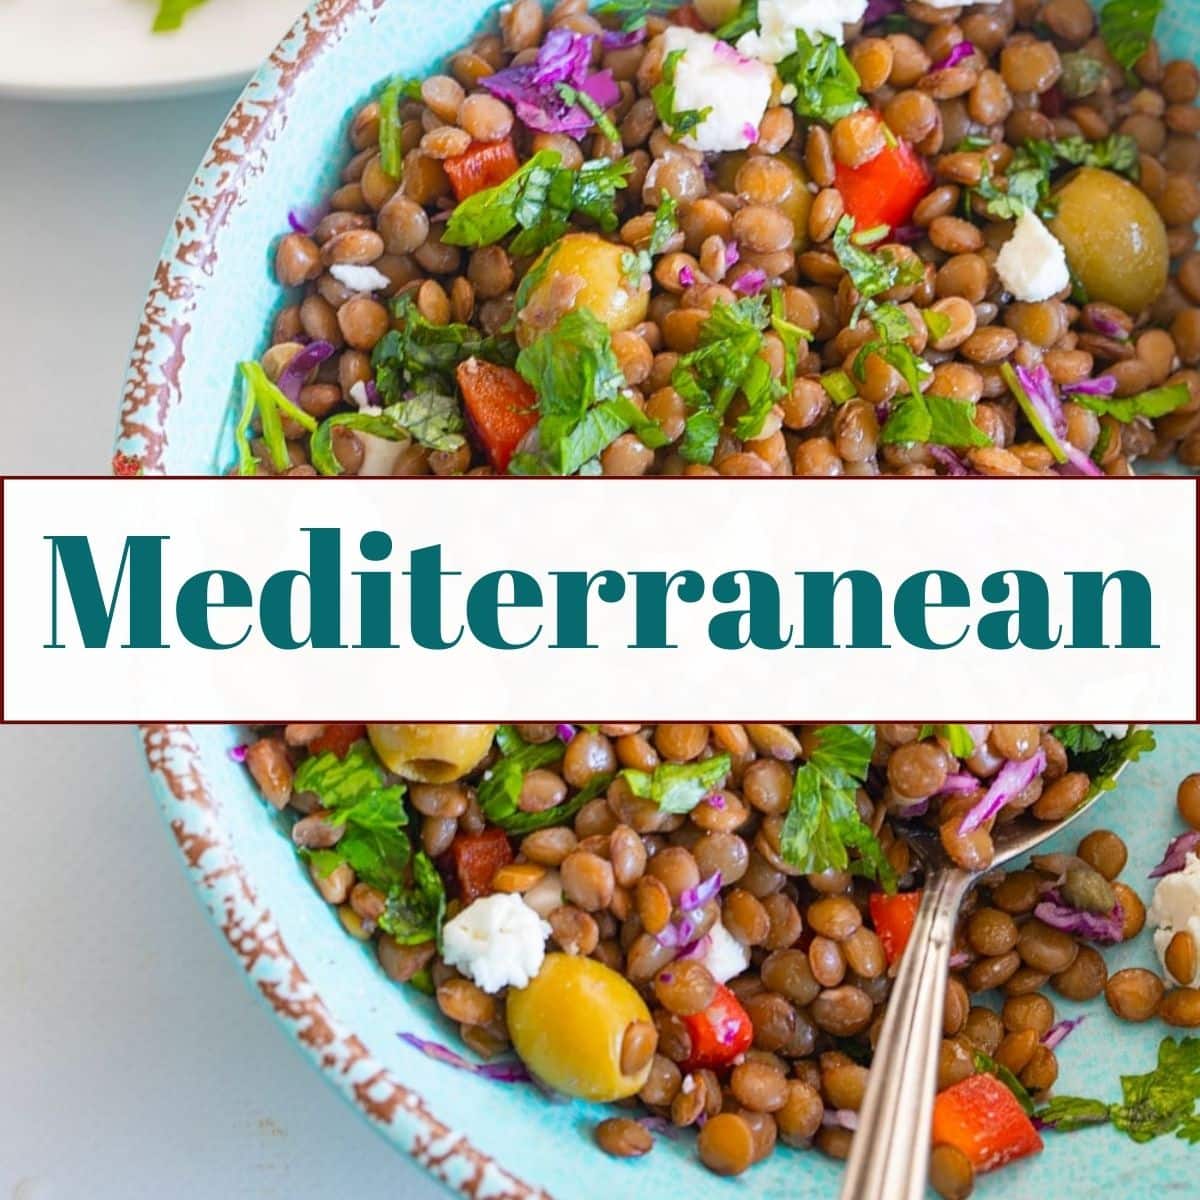 Mediterranean Lentil Salad as the backdrop and then, the title of the category is "Mediterranean"